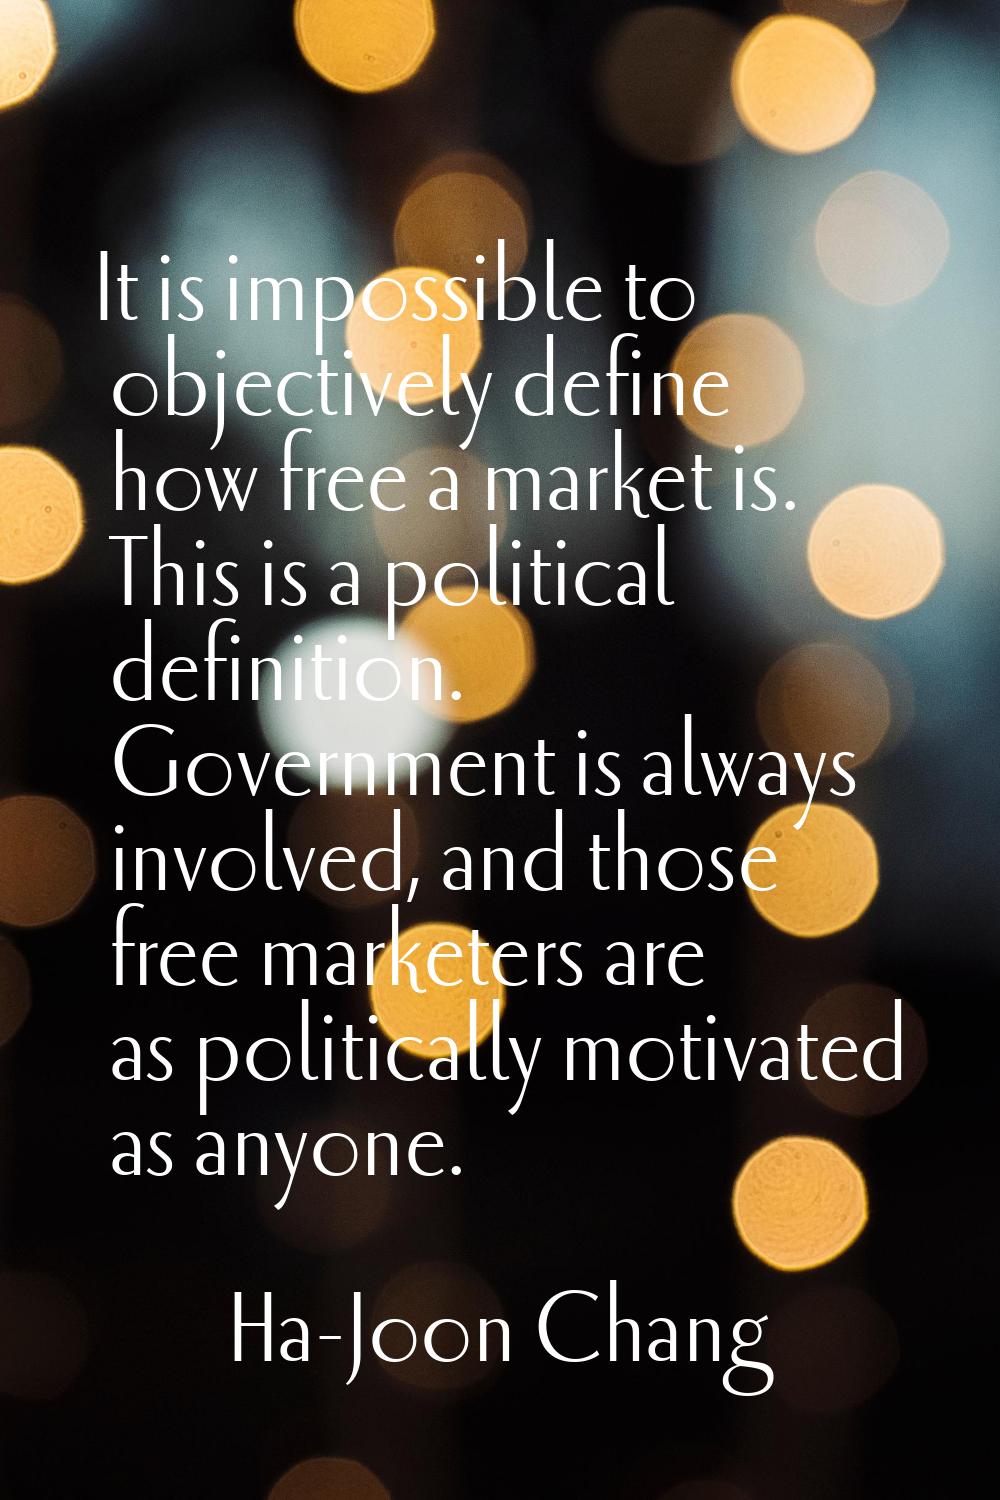 It is impossible to objectively define how free a market is. This is a political definition. Govern